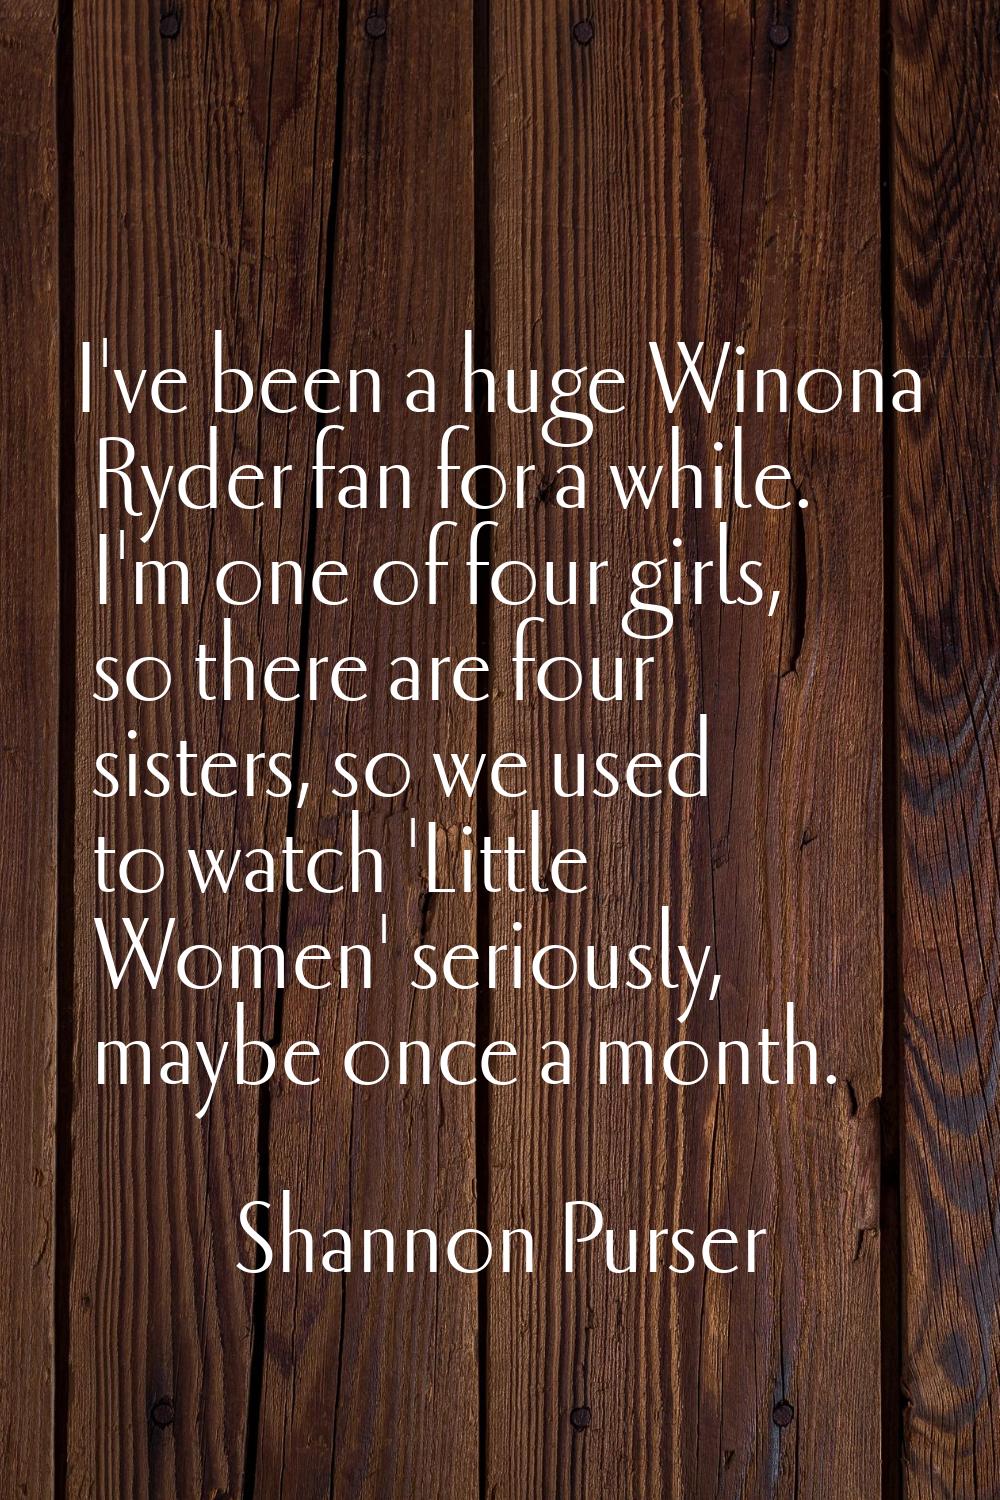 I've been a huge Winona Ryder fan for a while. I'm one of four girls, so there are four sisters, so